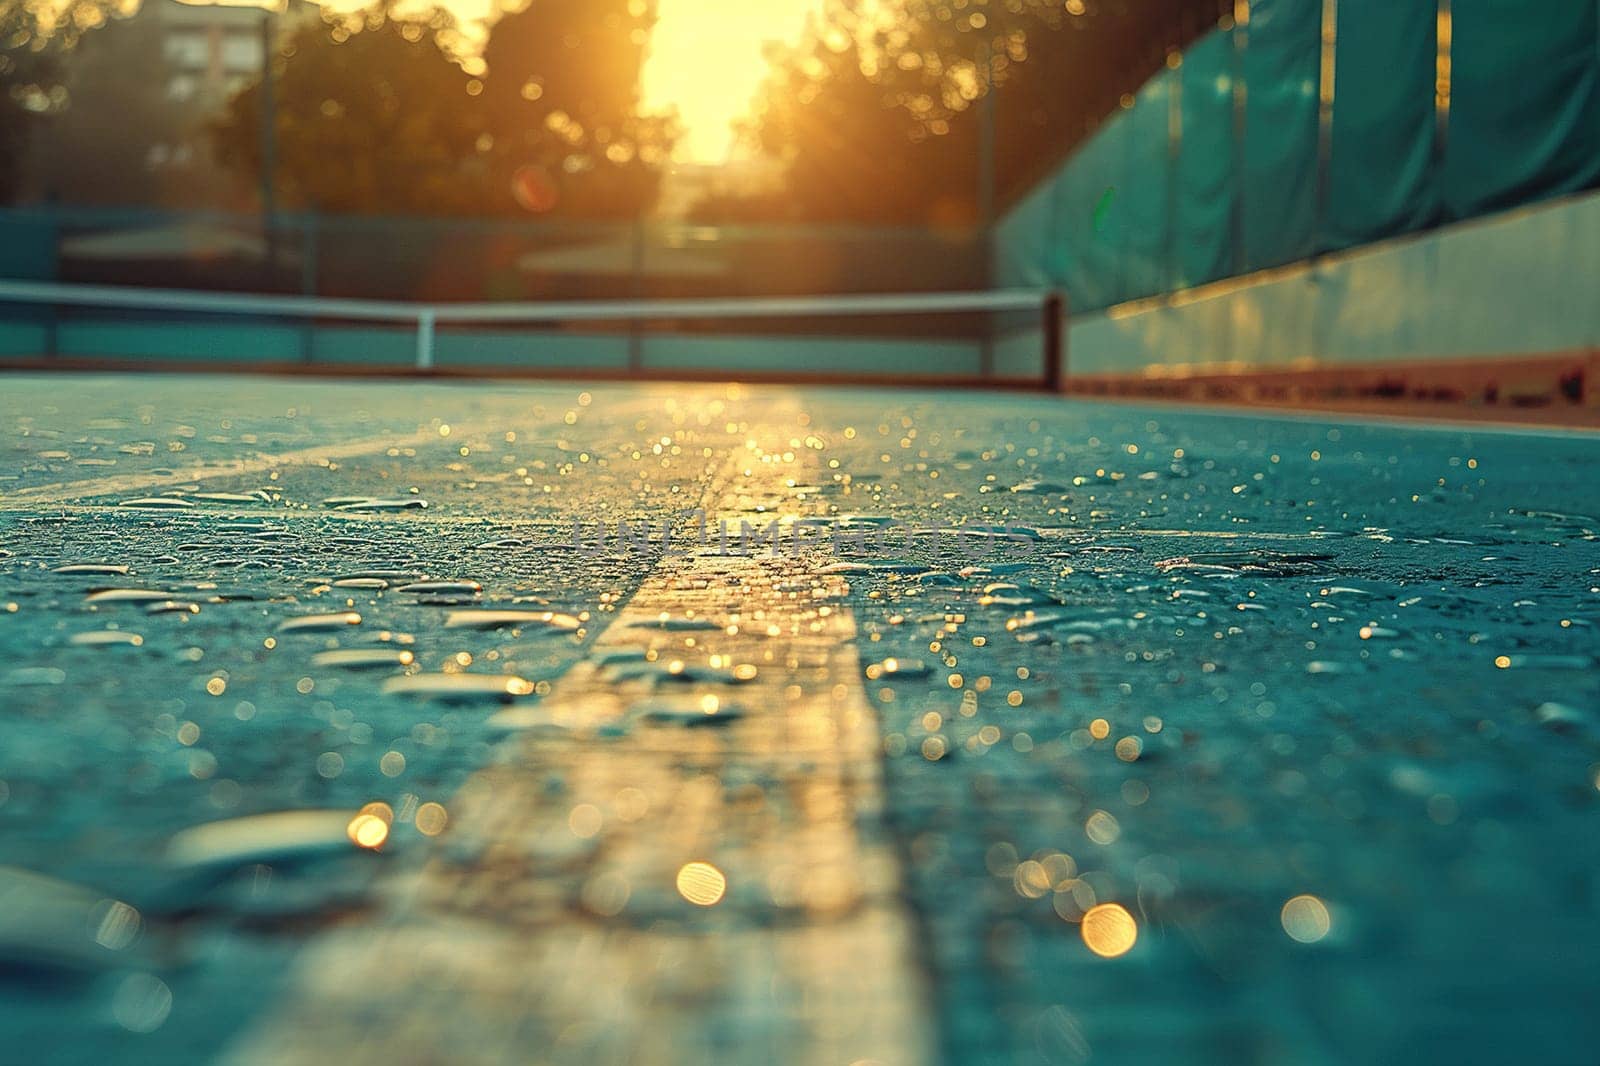 Close-up of a green tennis court or sports stadium surface at sunset.